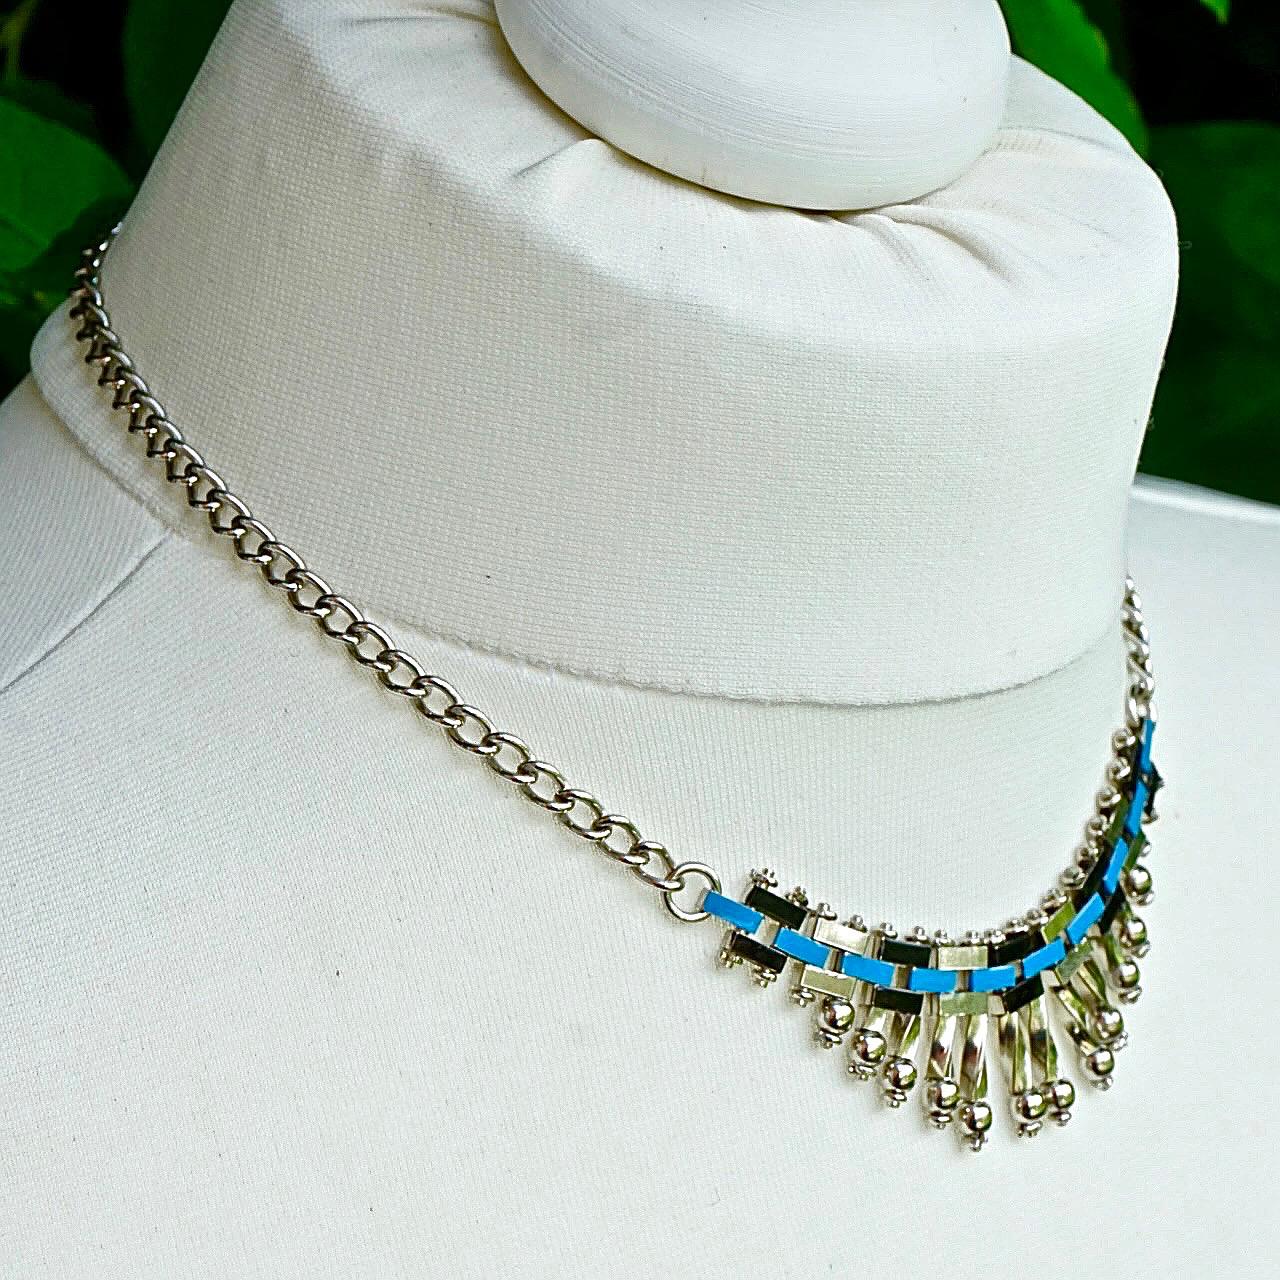 Jakob Bengel Art Deco Chrome Plated Blue and Black Enamel Necklace circa 1930s In Good Condition For Sale In London, GB